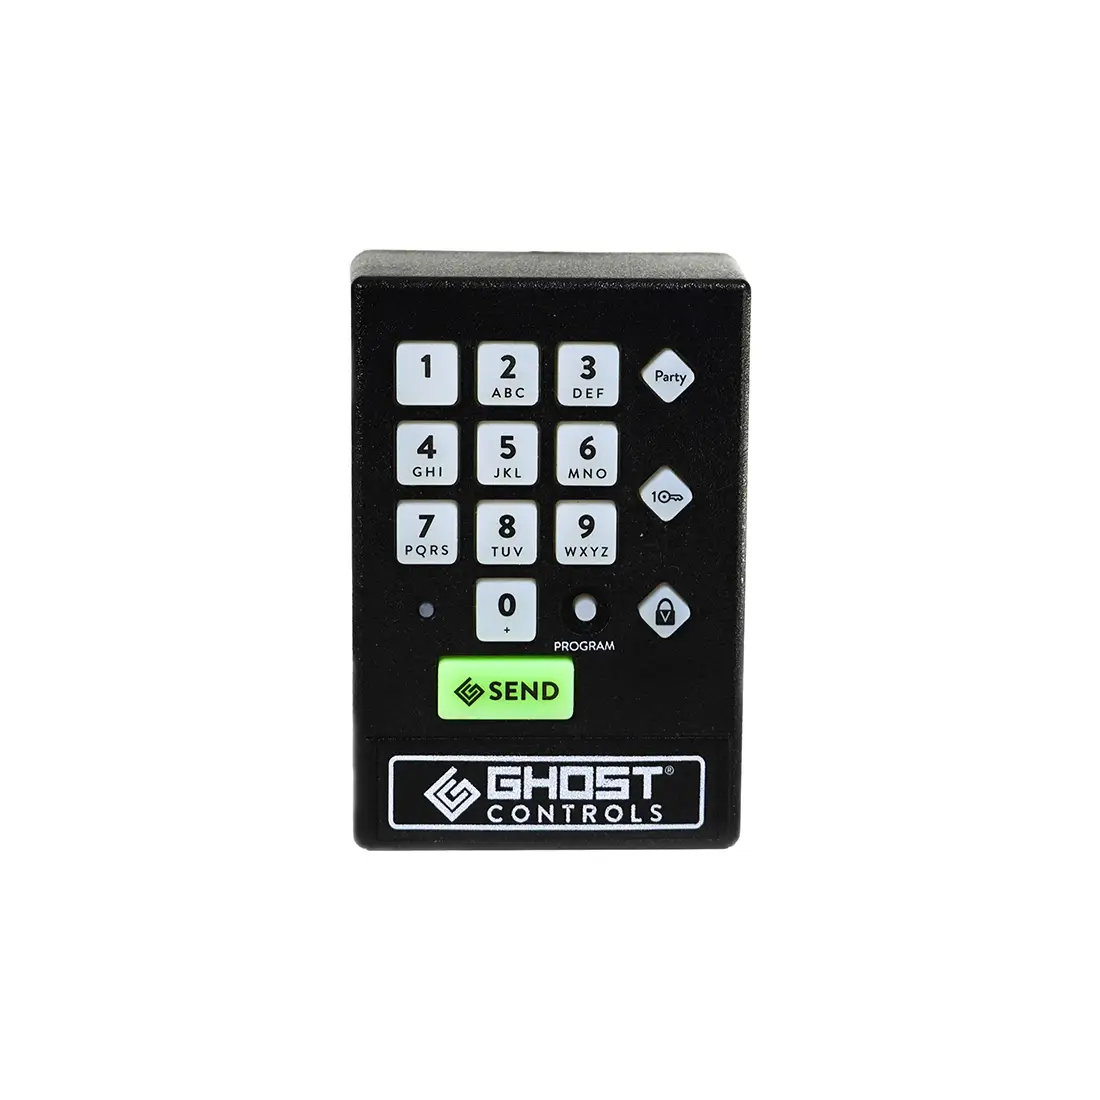 can replacement keypad buttons be purchased??